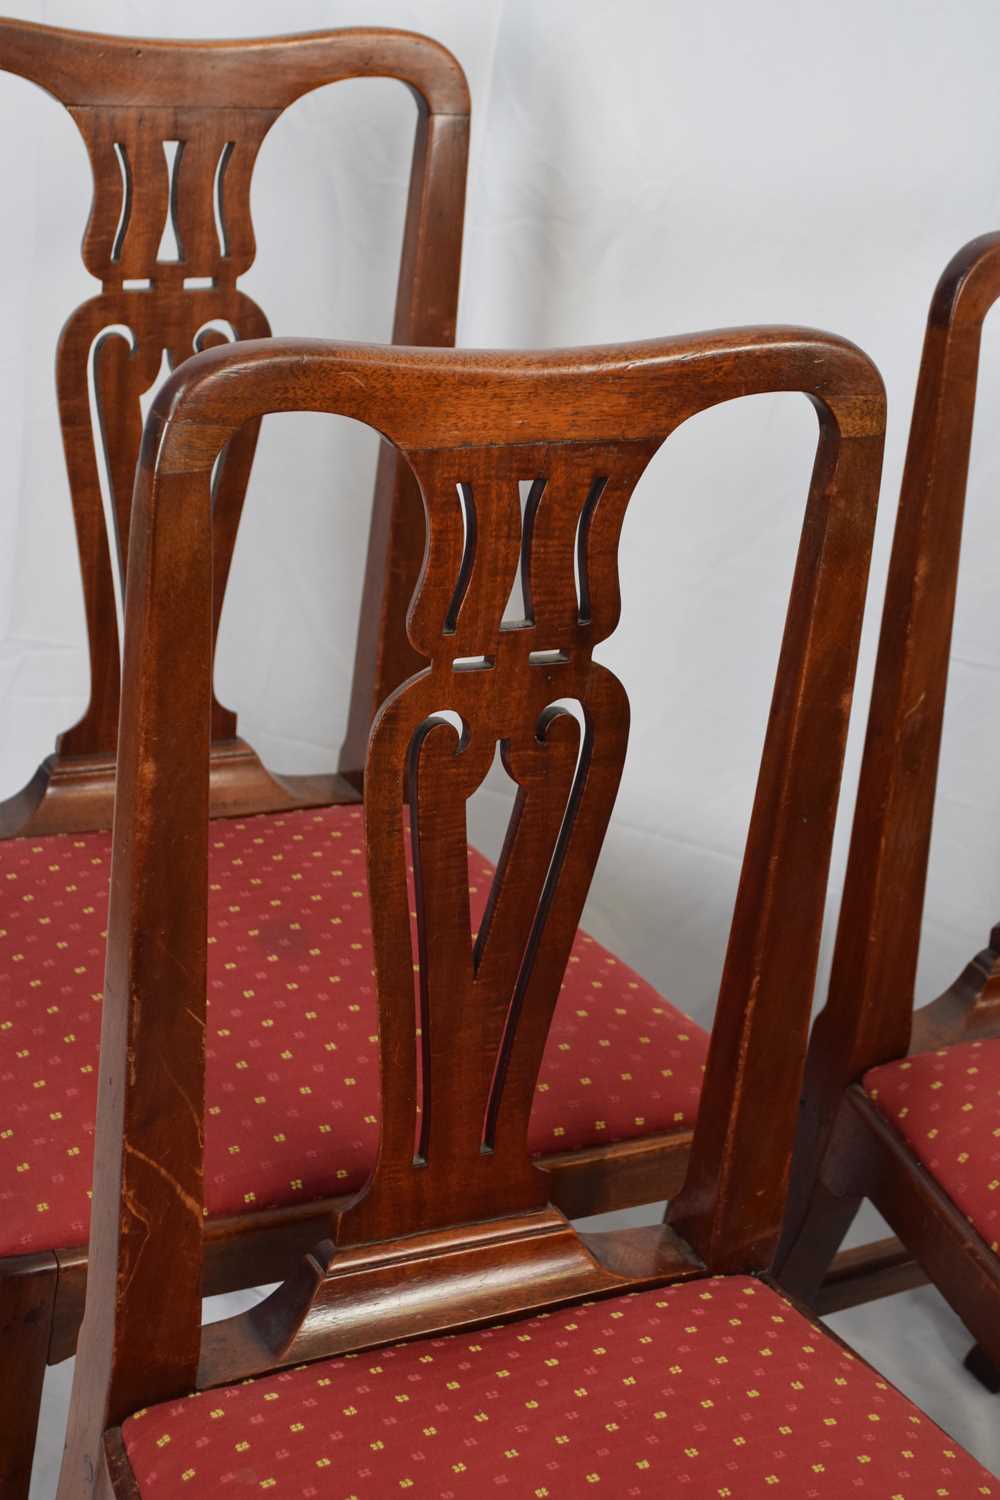 Set of eight 19th century mahogany dining chairs with pierced splat backs and red upholstered seats - Image 3 of 4